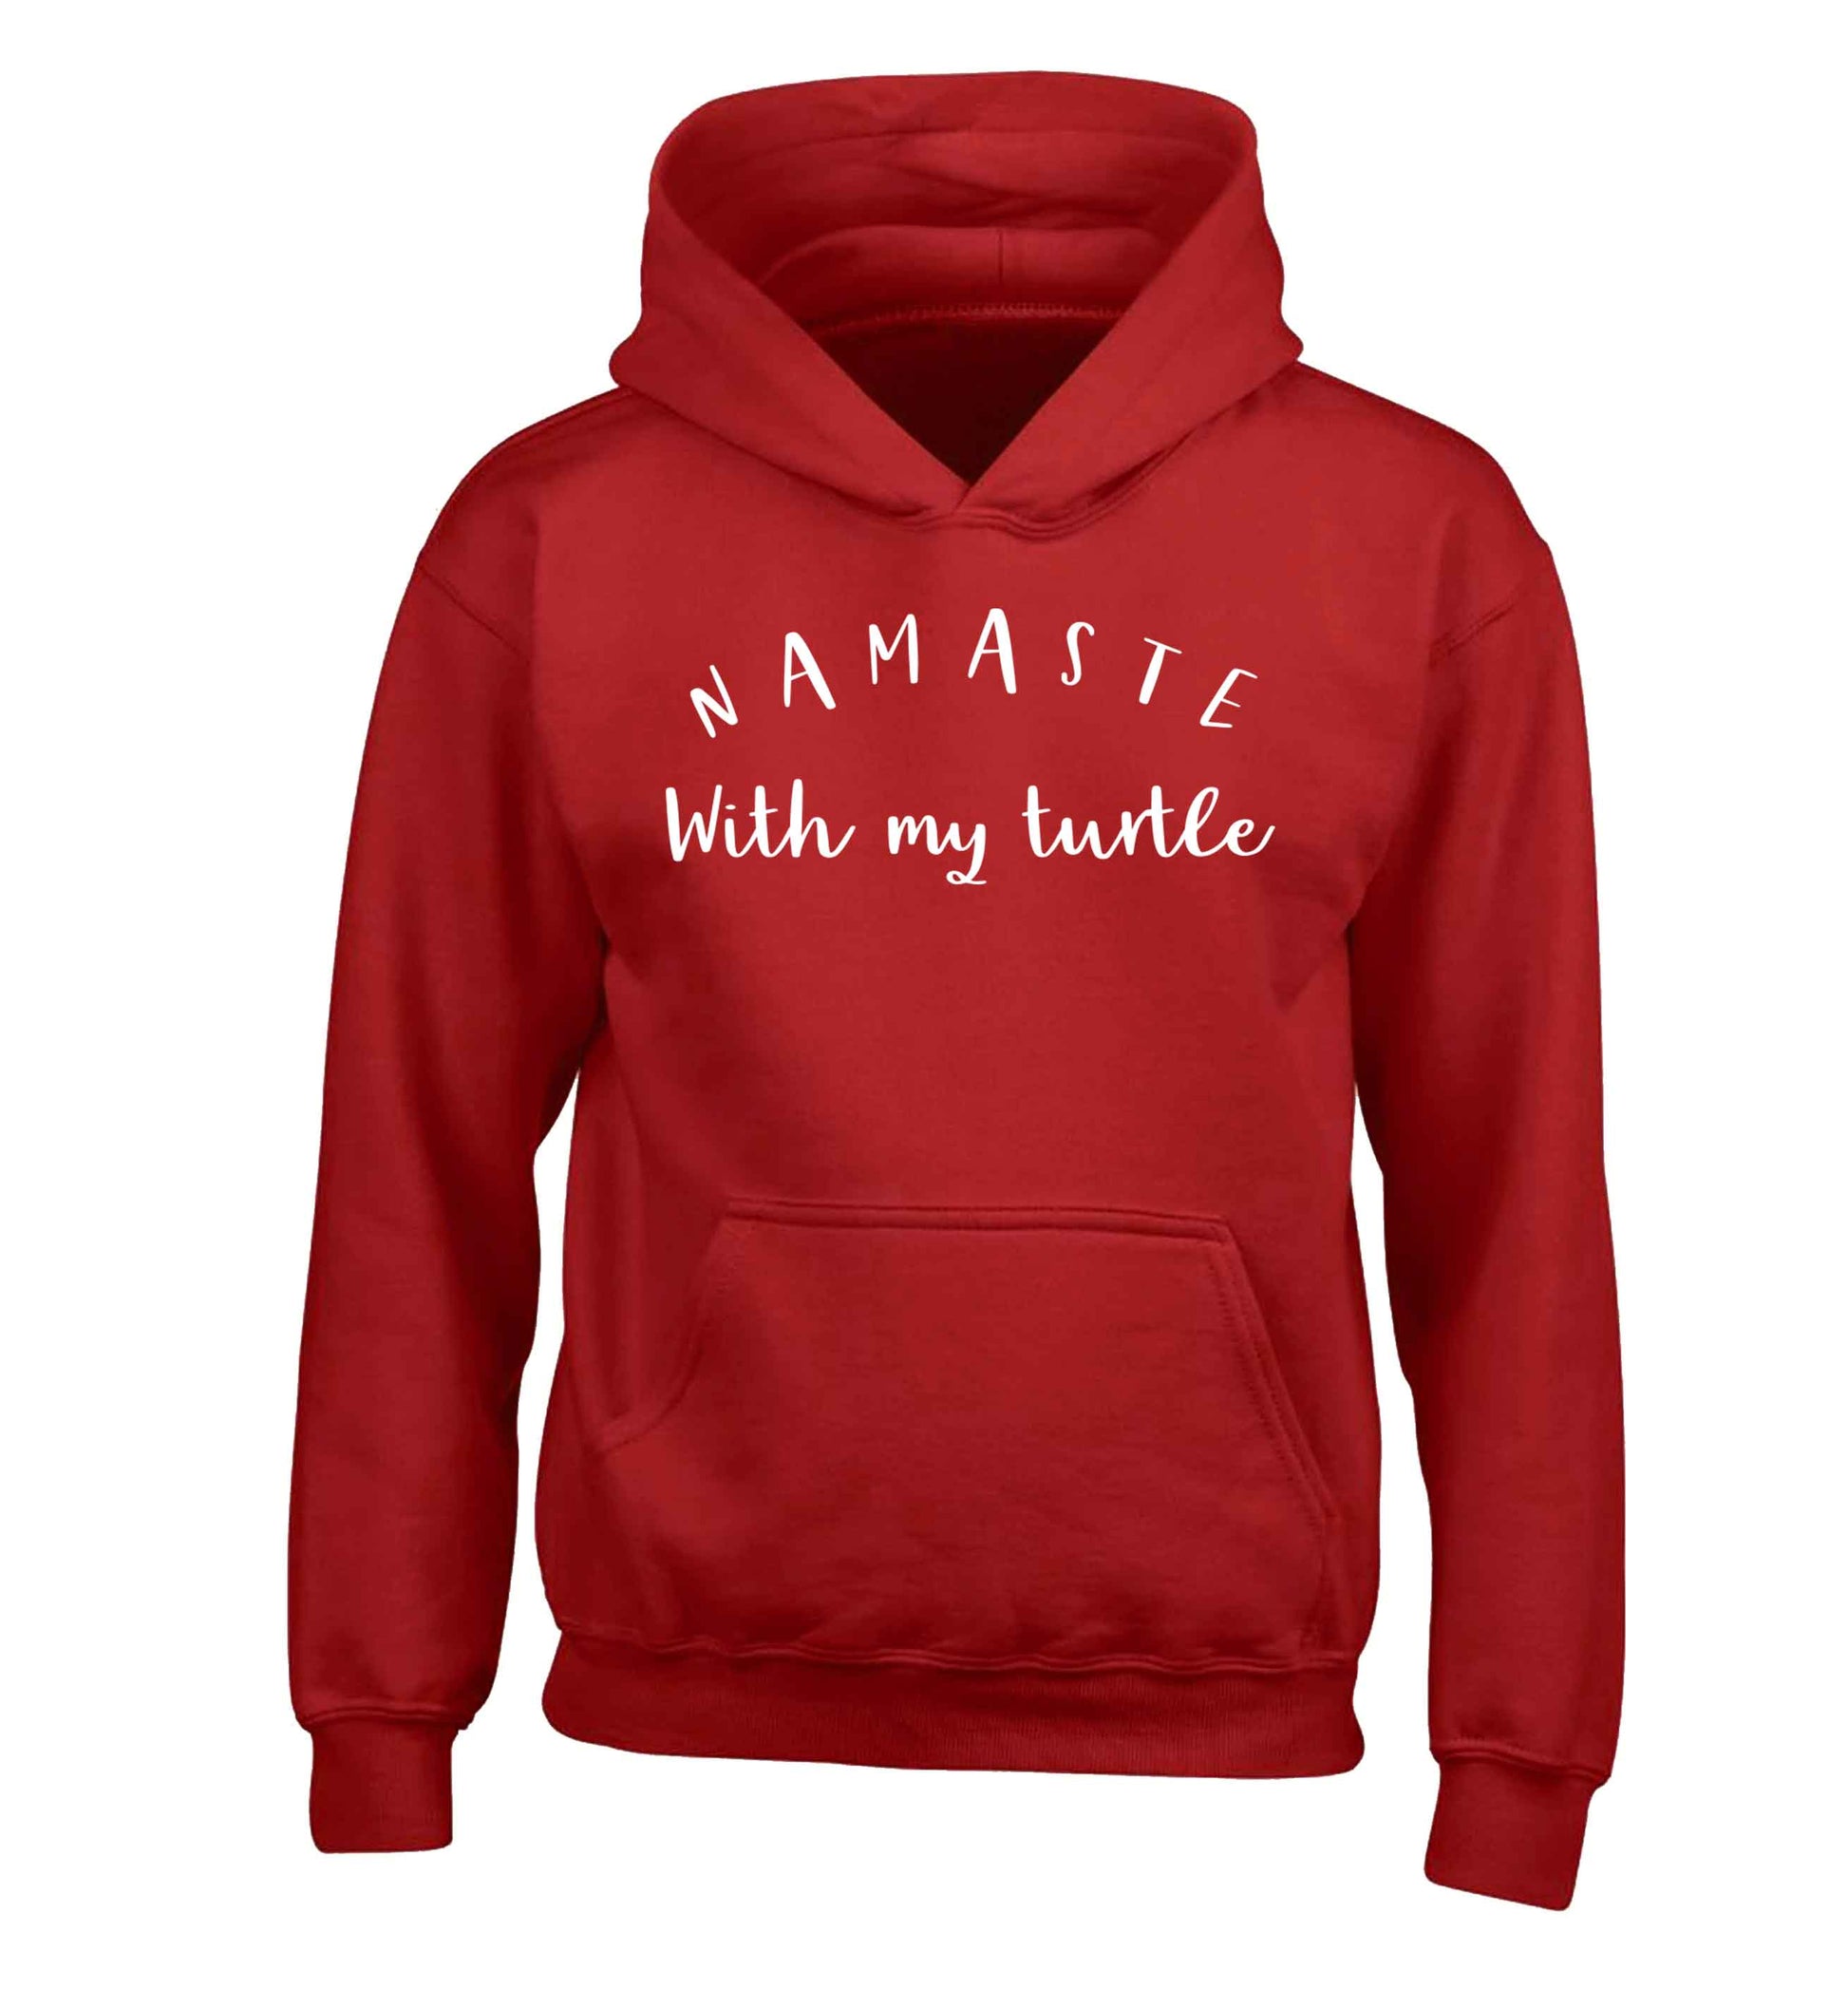 Namaste with my turtle children's red hoodie 12-13 Years